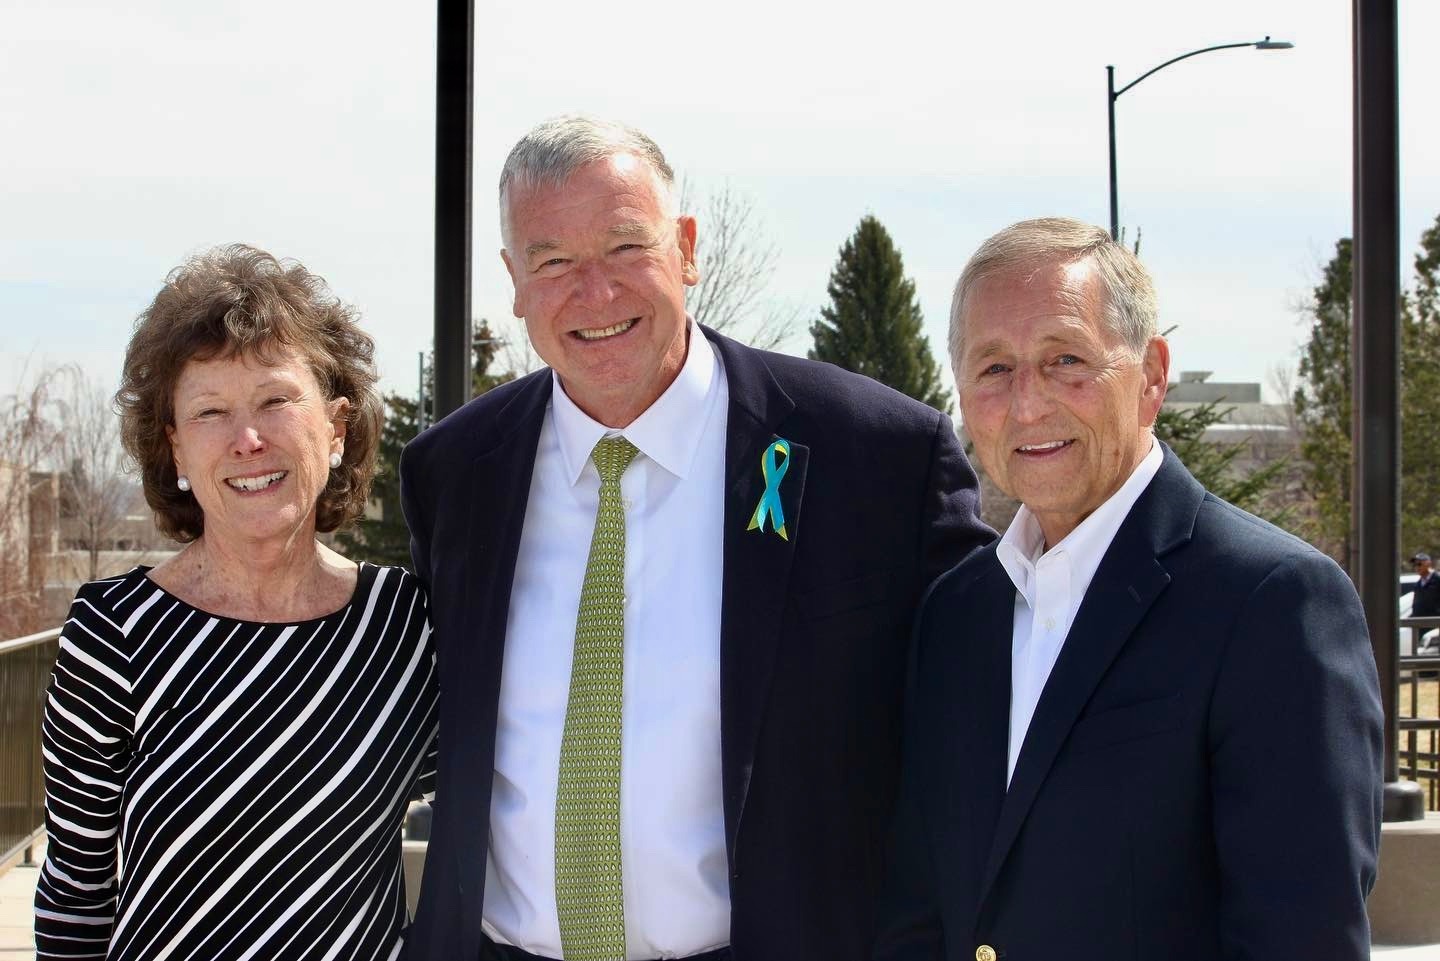 Dorothy Bradley, left, and her Republican rival, Marc Racicot, who narrowly defeated her to win the Montana governor's race in 1992. They came together in June to endorse Independent candidate Gary Buchanan, a businessperson from Billings, Montana who is challenging incumbent Congressman Matt Rosendale to represent eastern Montanan. Photo courtesy Gary Buchanan for Congress campaign.